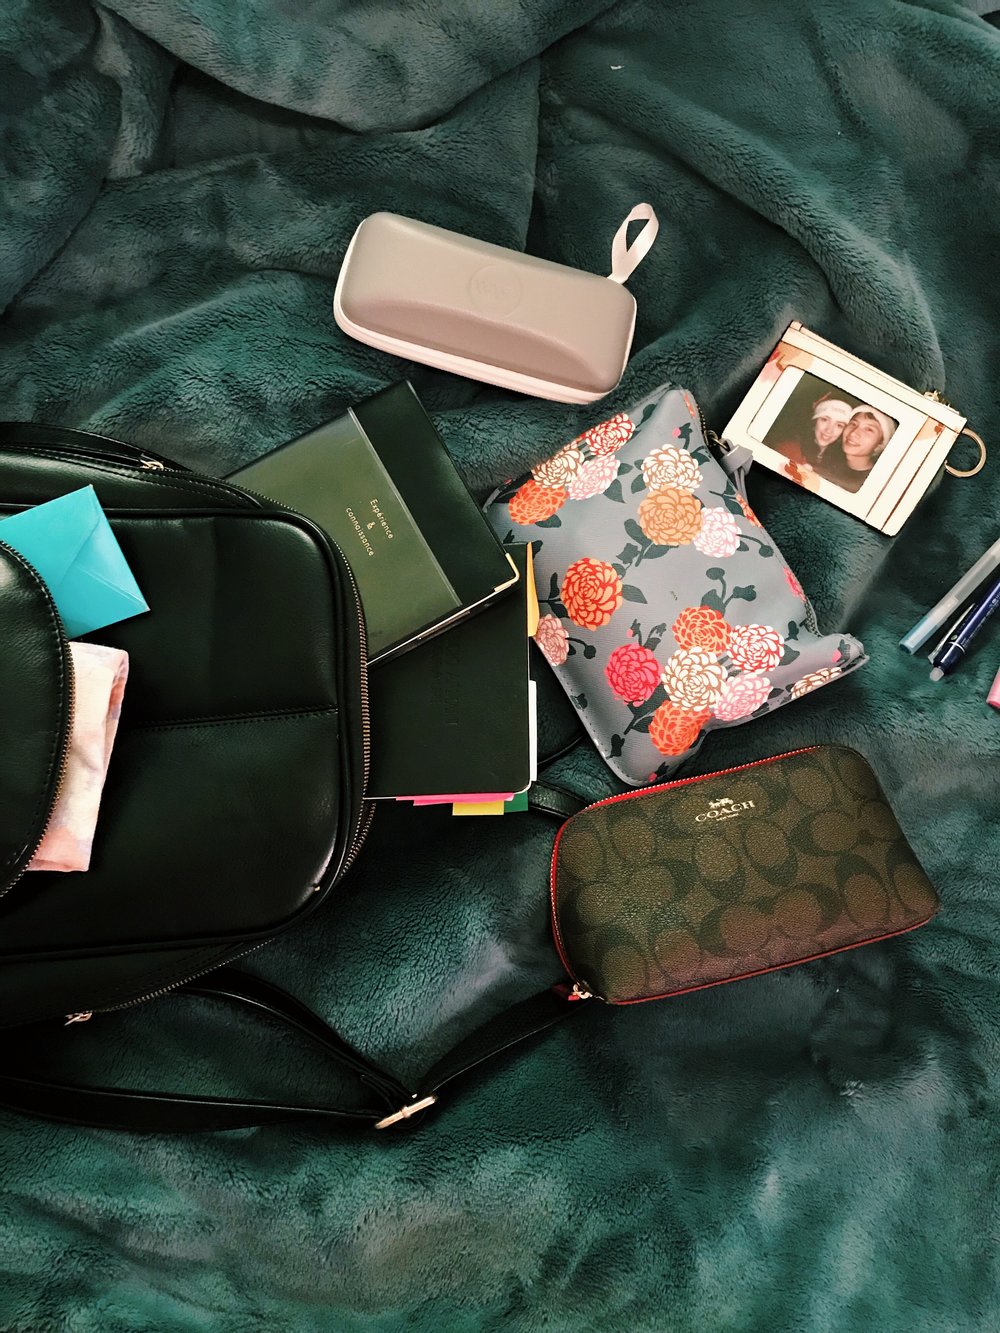 WHAT'S IN MY WORK BAG?! (7AM-6PM WORK DAY)